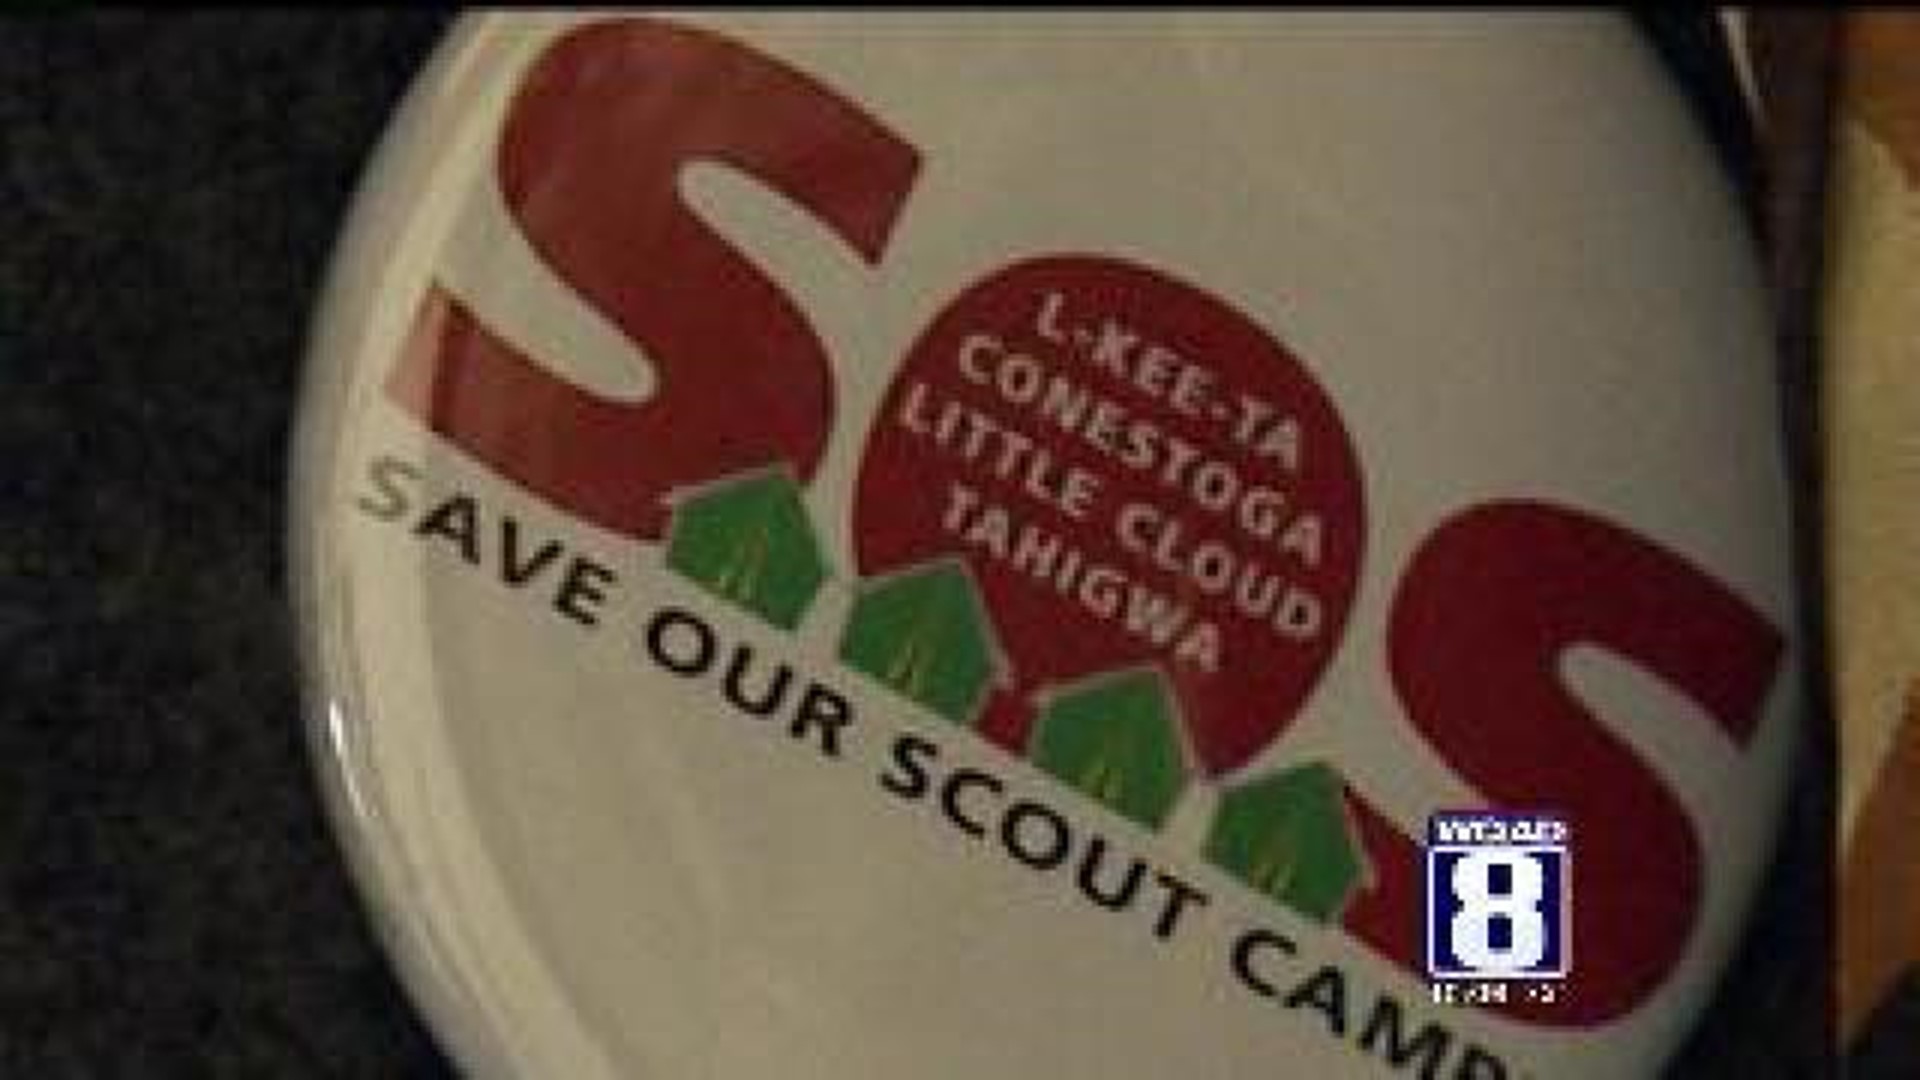 Save Our Scout Camp petition